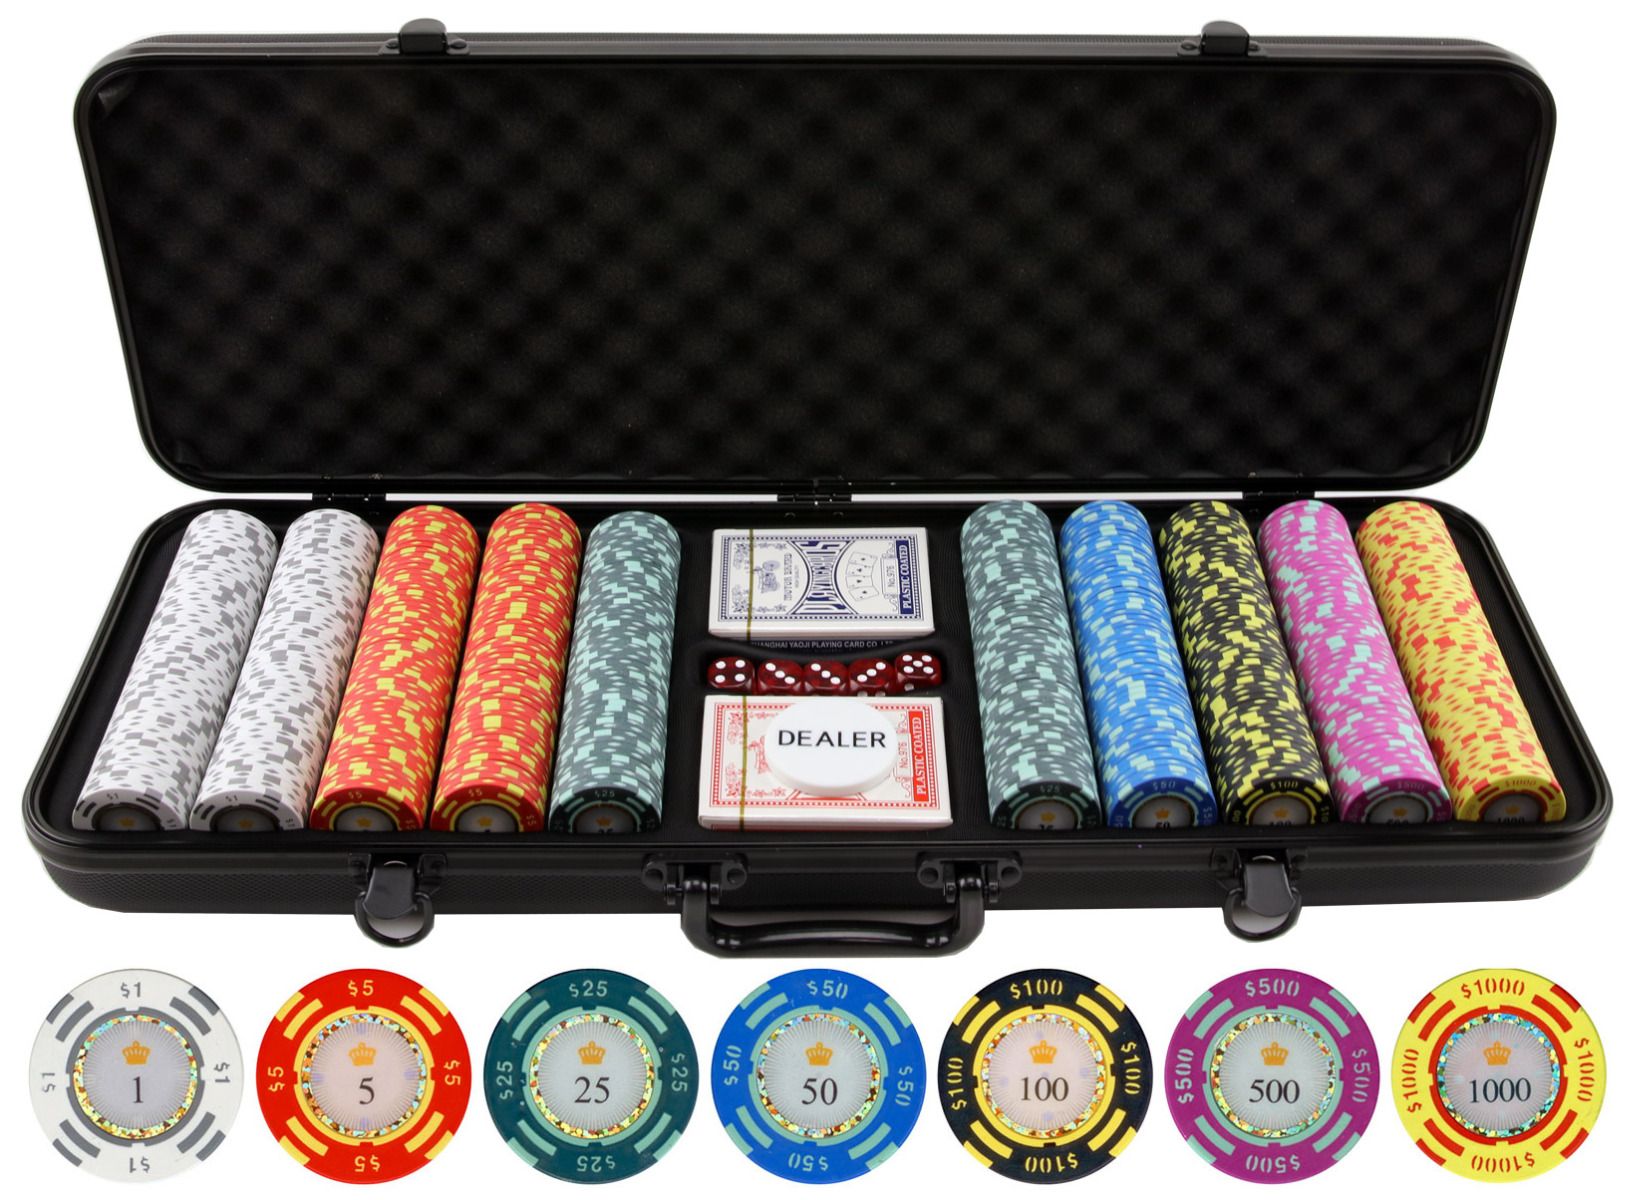 Tolkning krybdyr Tidlig 500 piece Crown Casino 13.5g Clay Poker Chips from Discount Poker Shop